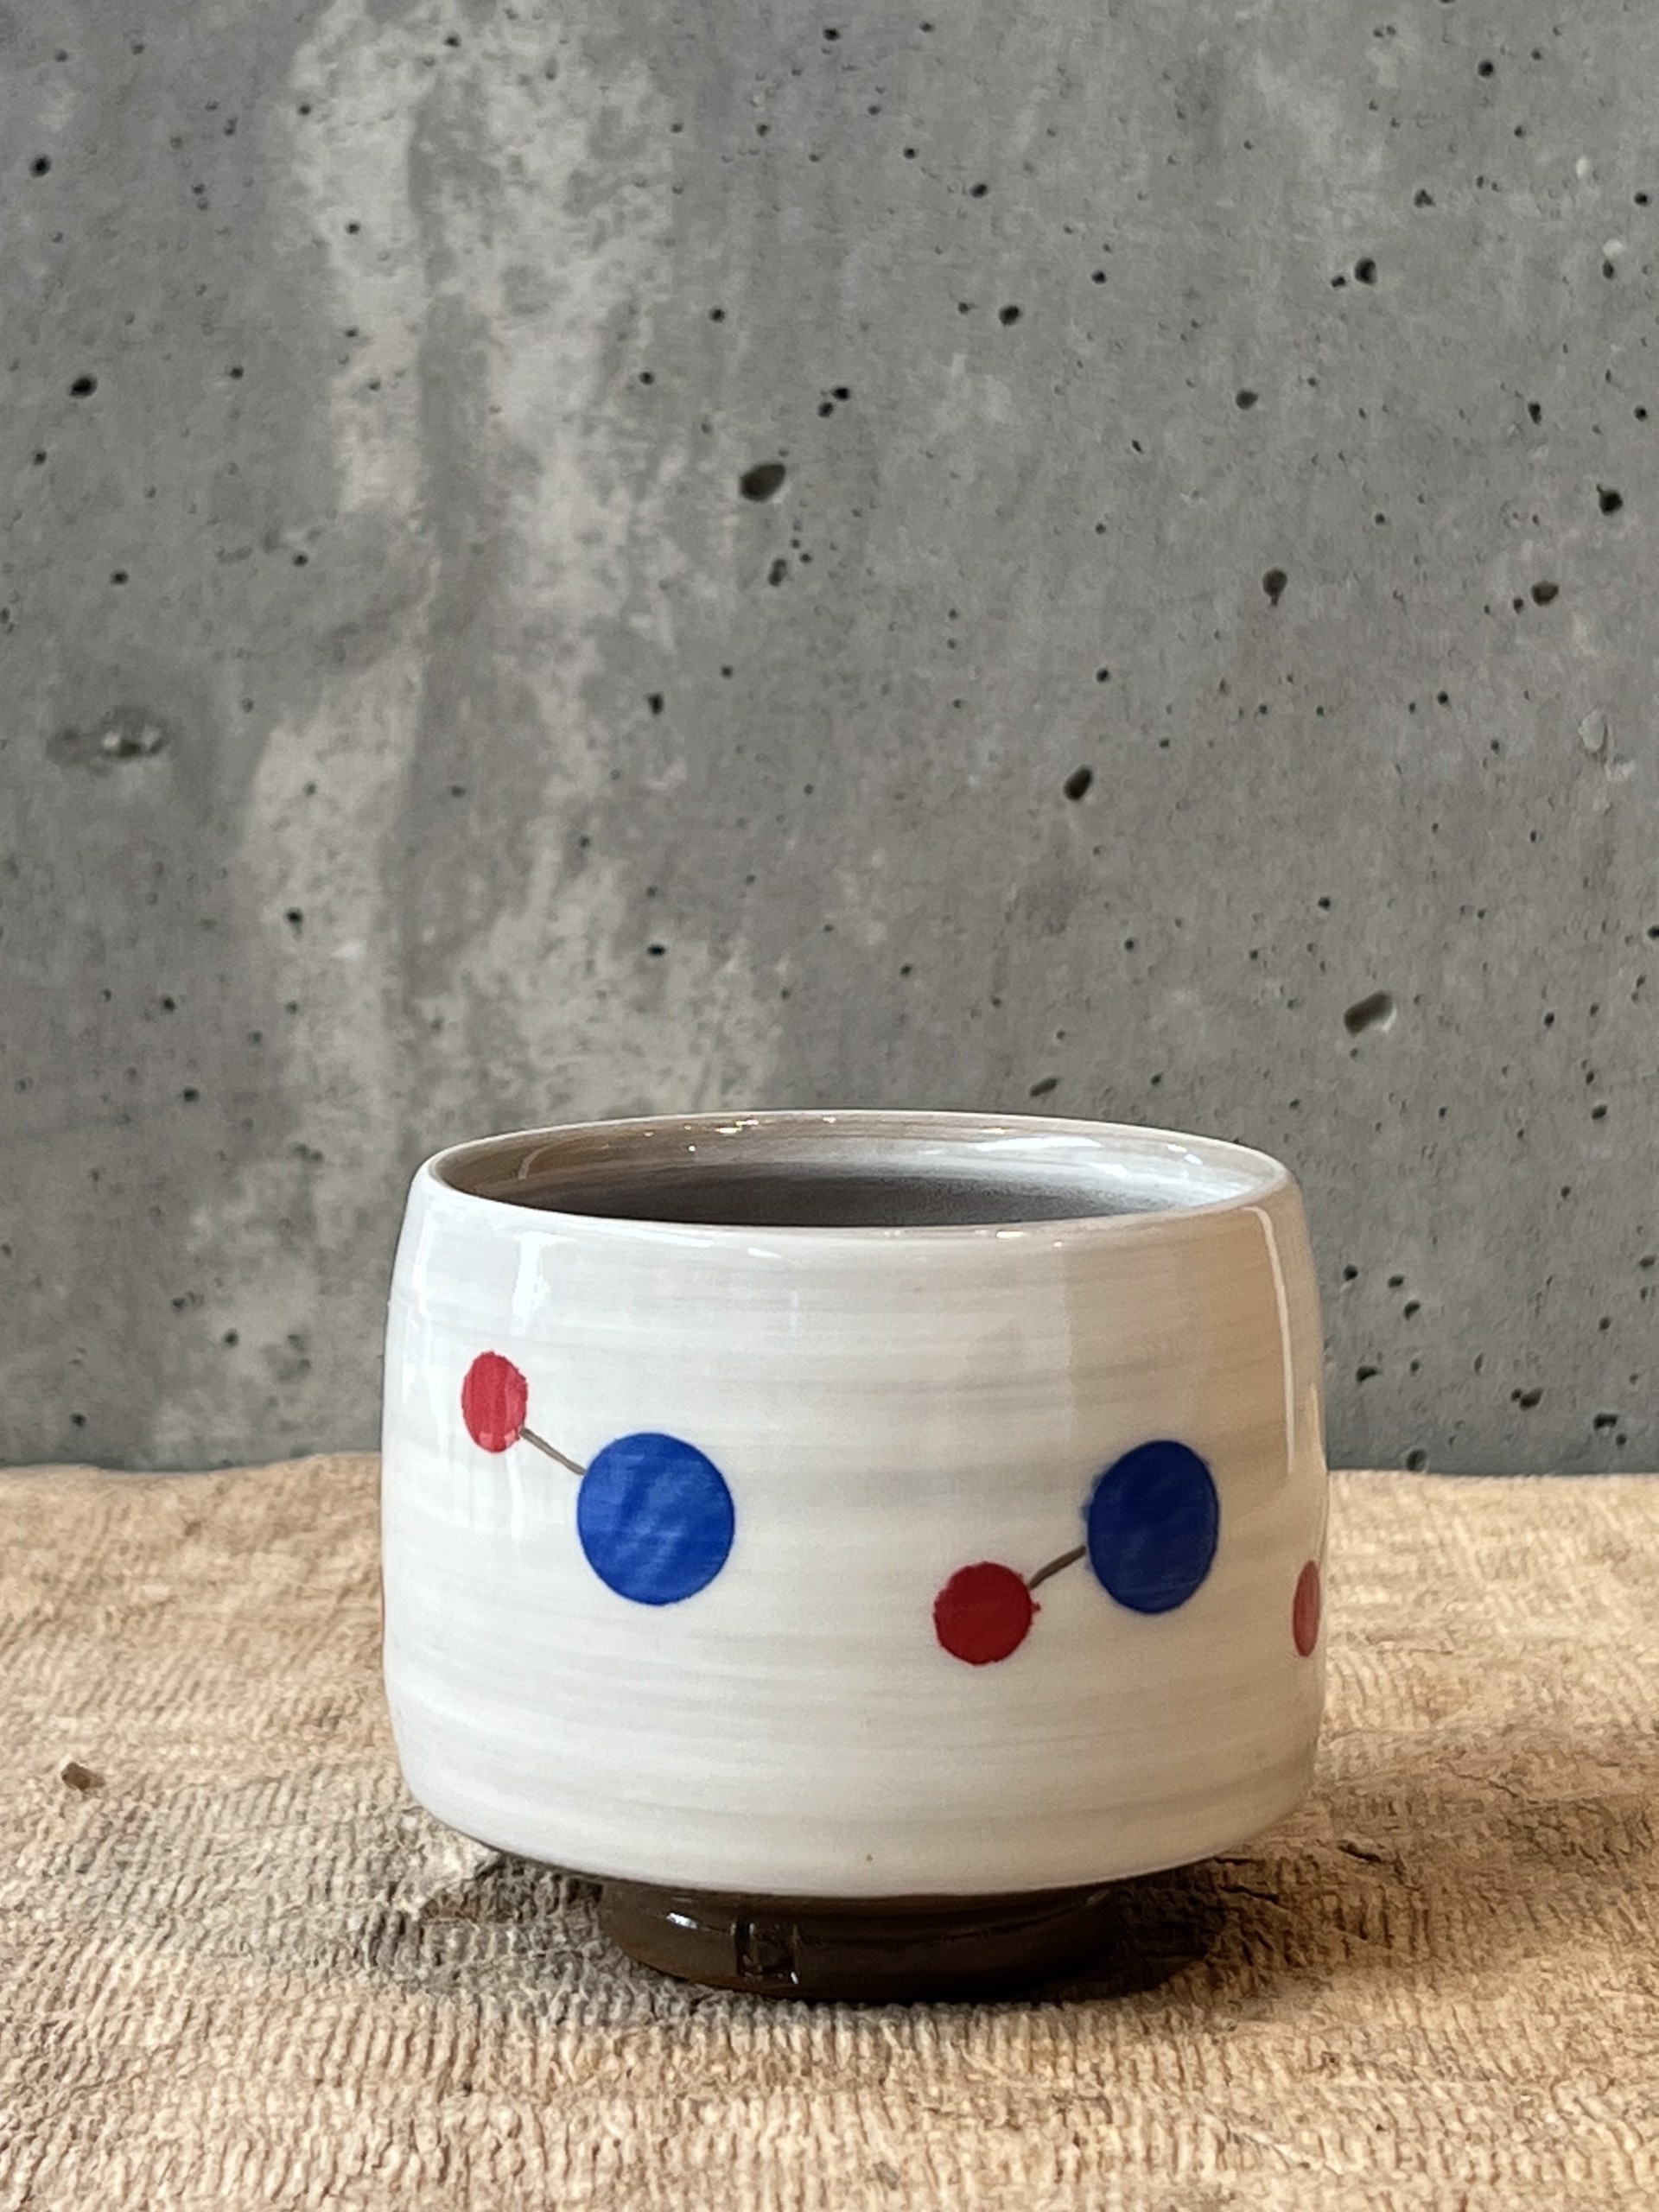 Yunomi Cup with Dots No. 1 by Doug Schroder